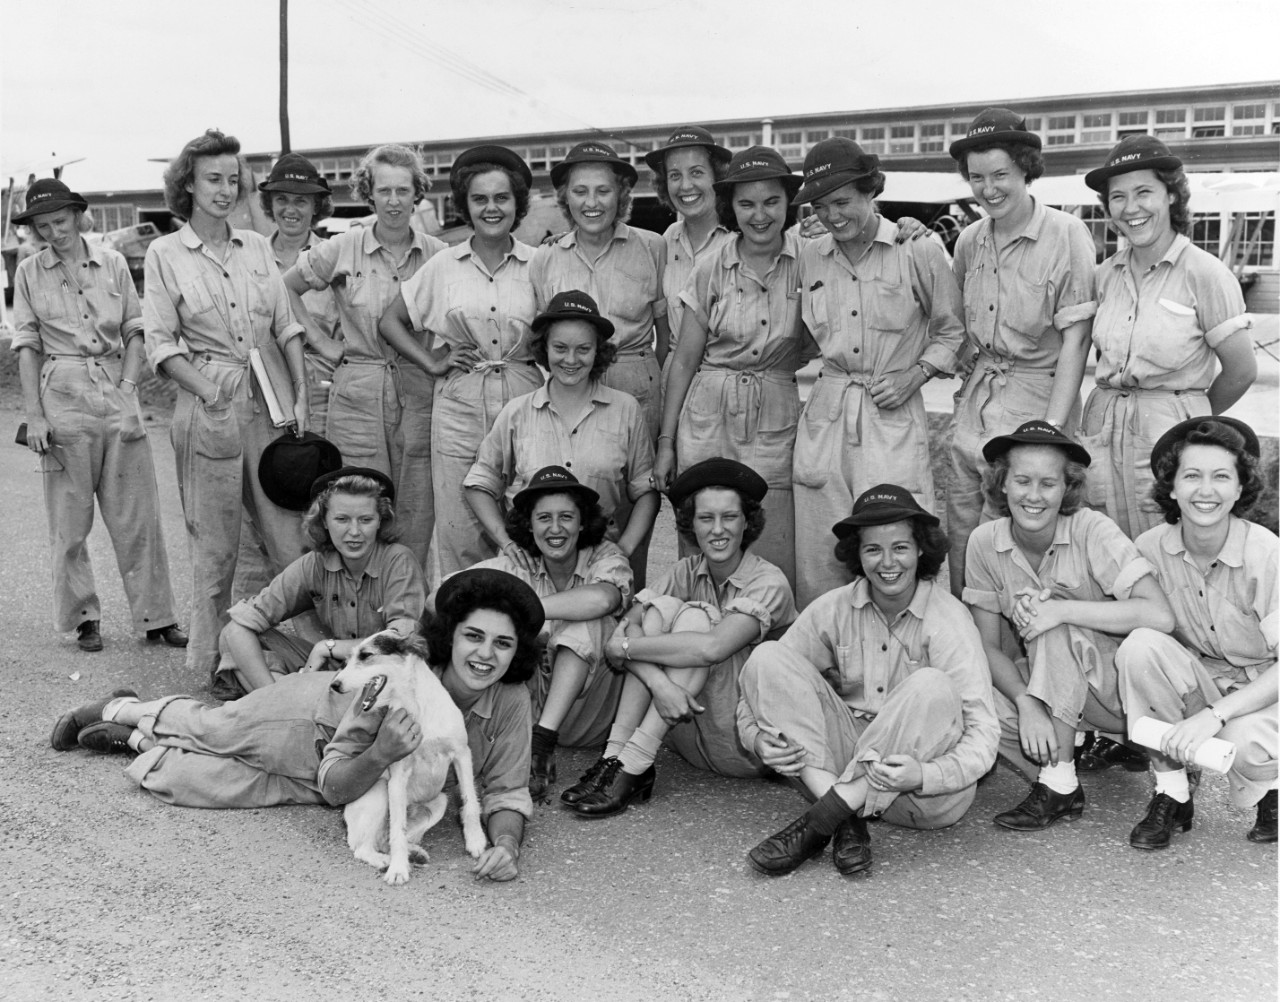 Group photo of women in cover working coveralls and hats inscribed with U.S. Navy.